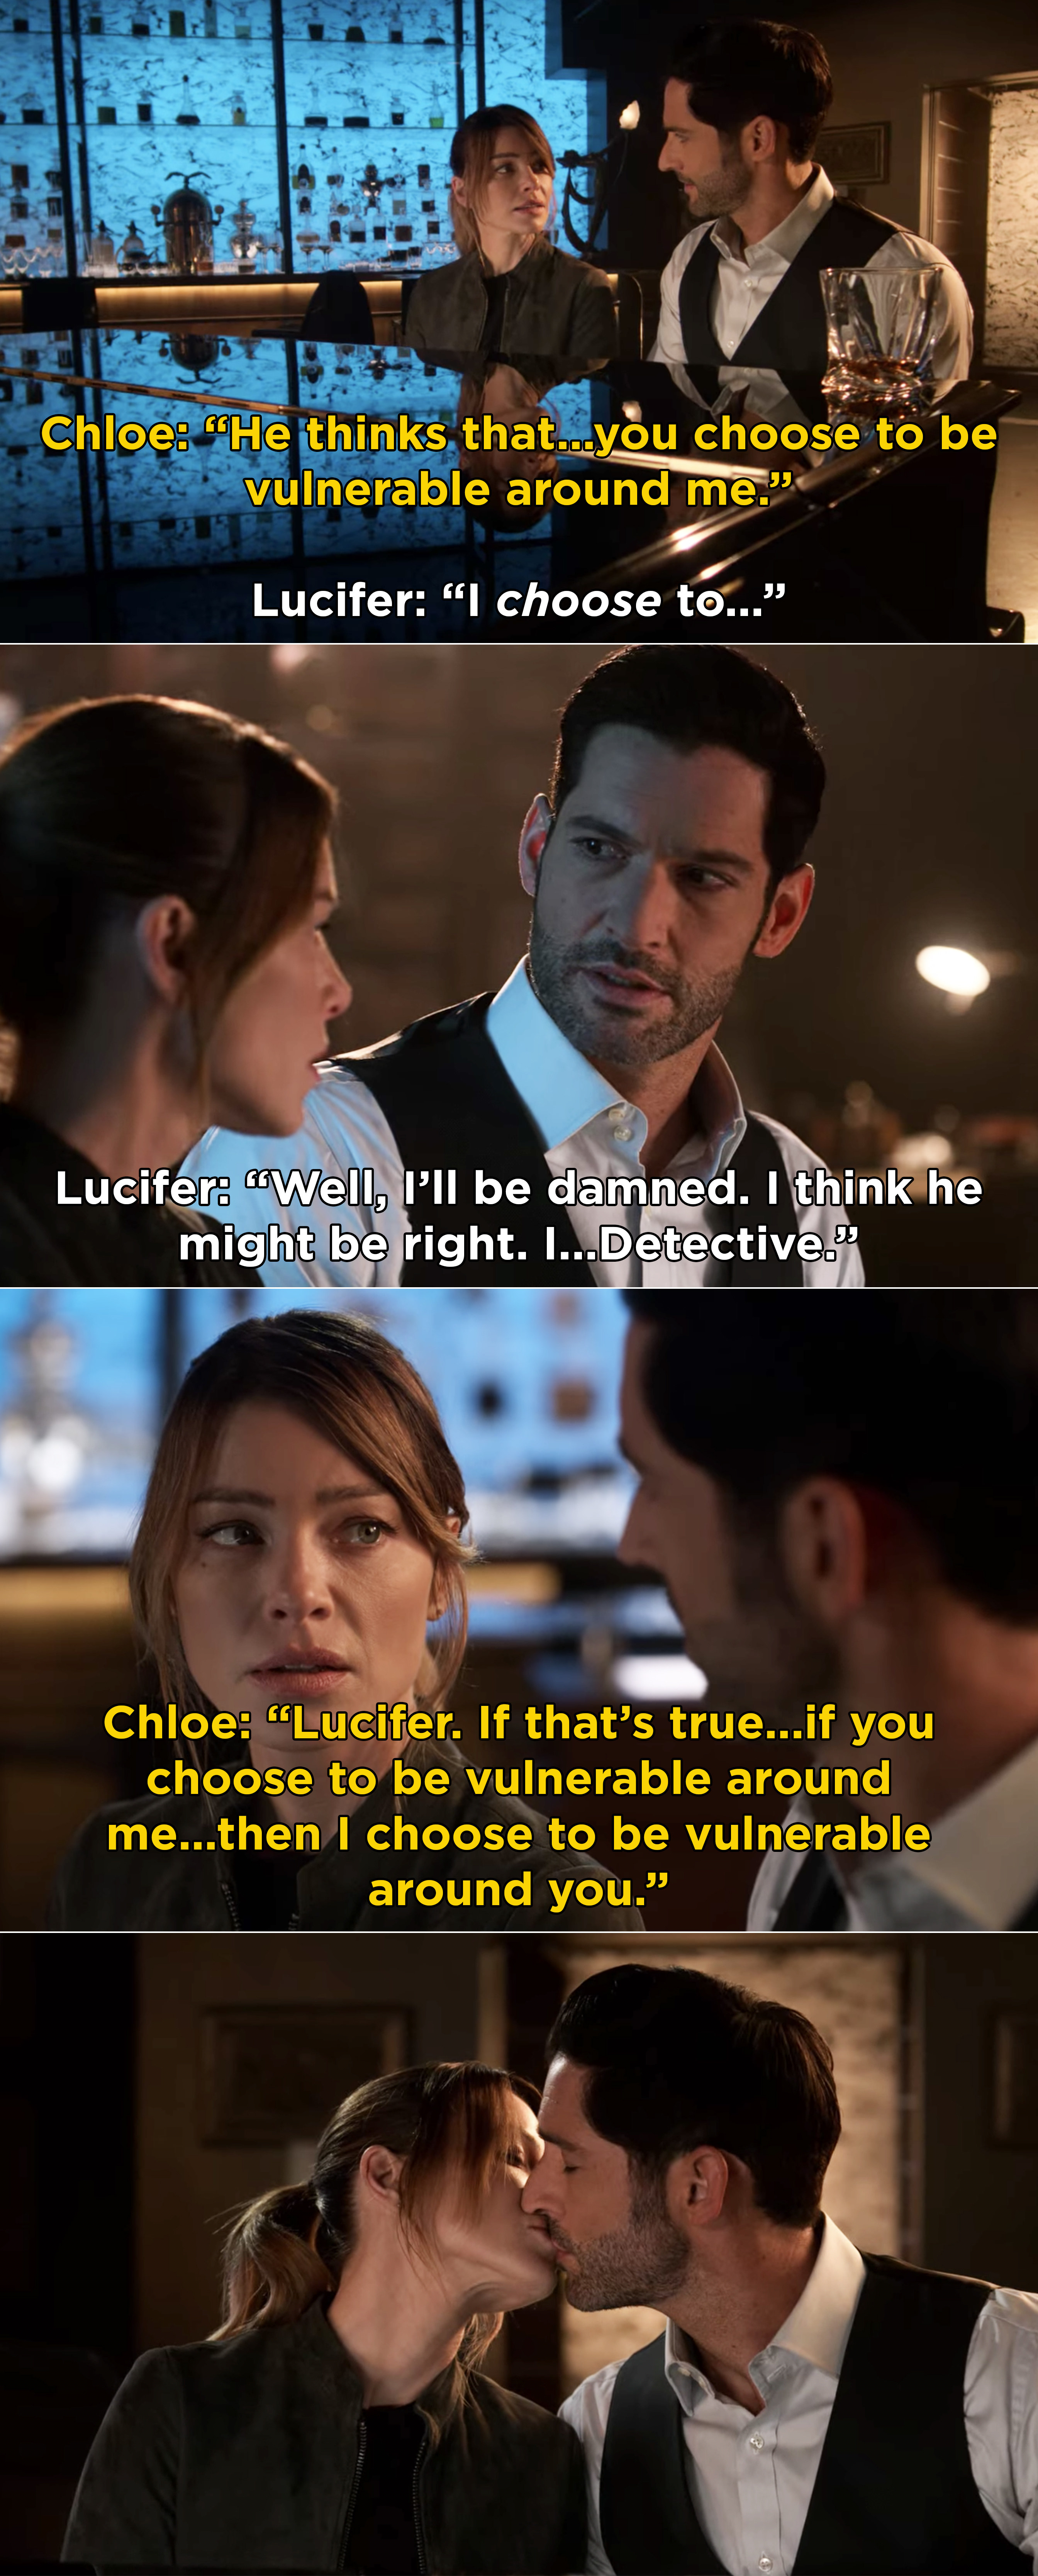 Lucifer learning that he chooses to be vulnerable around Chloe, and Chloe saying that she will be vulnerable around him too, and they kiss